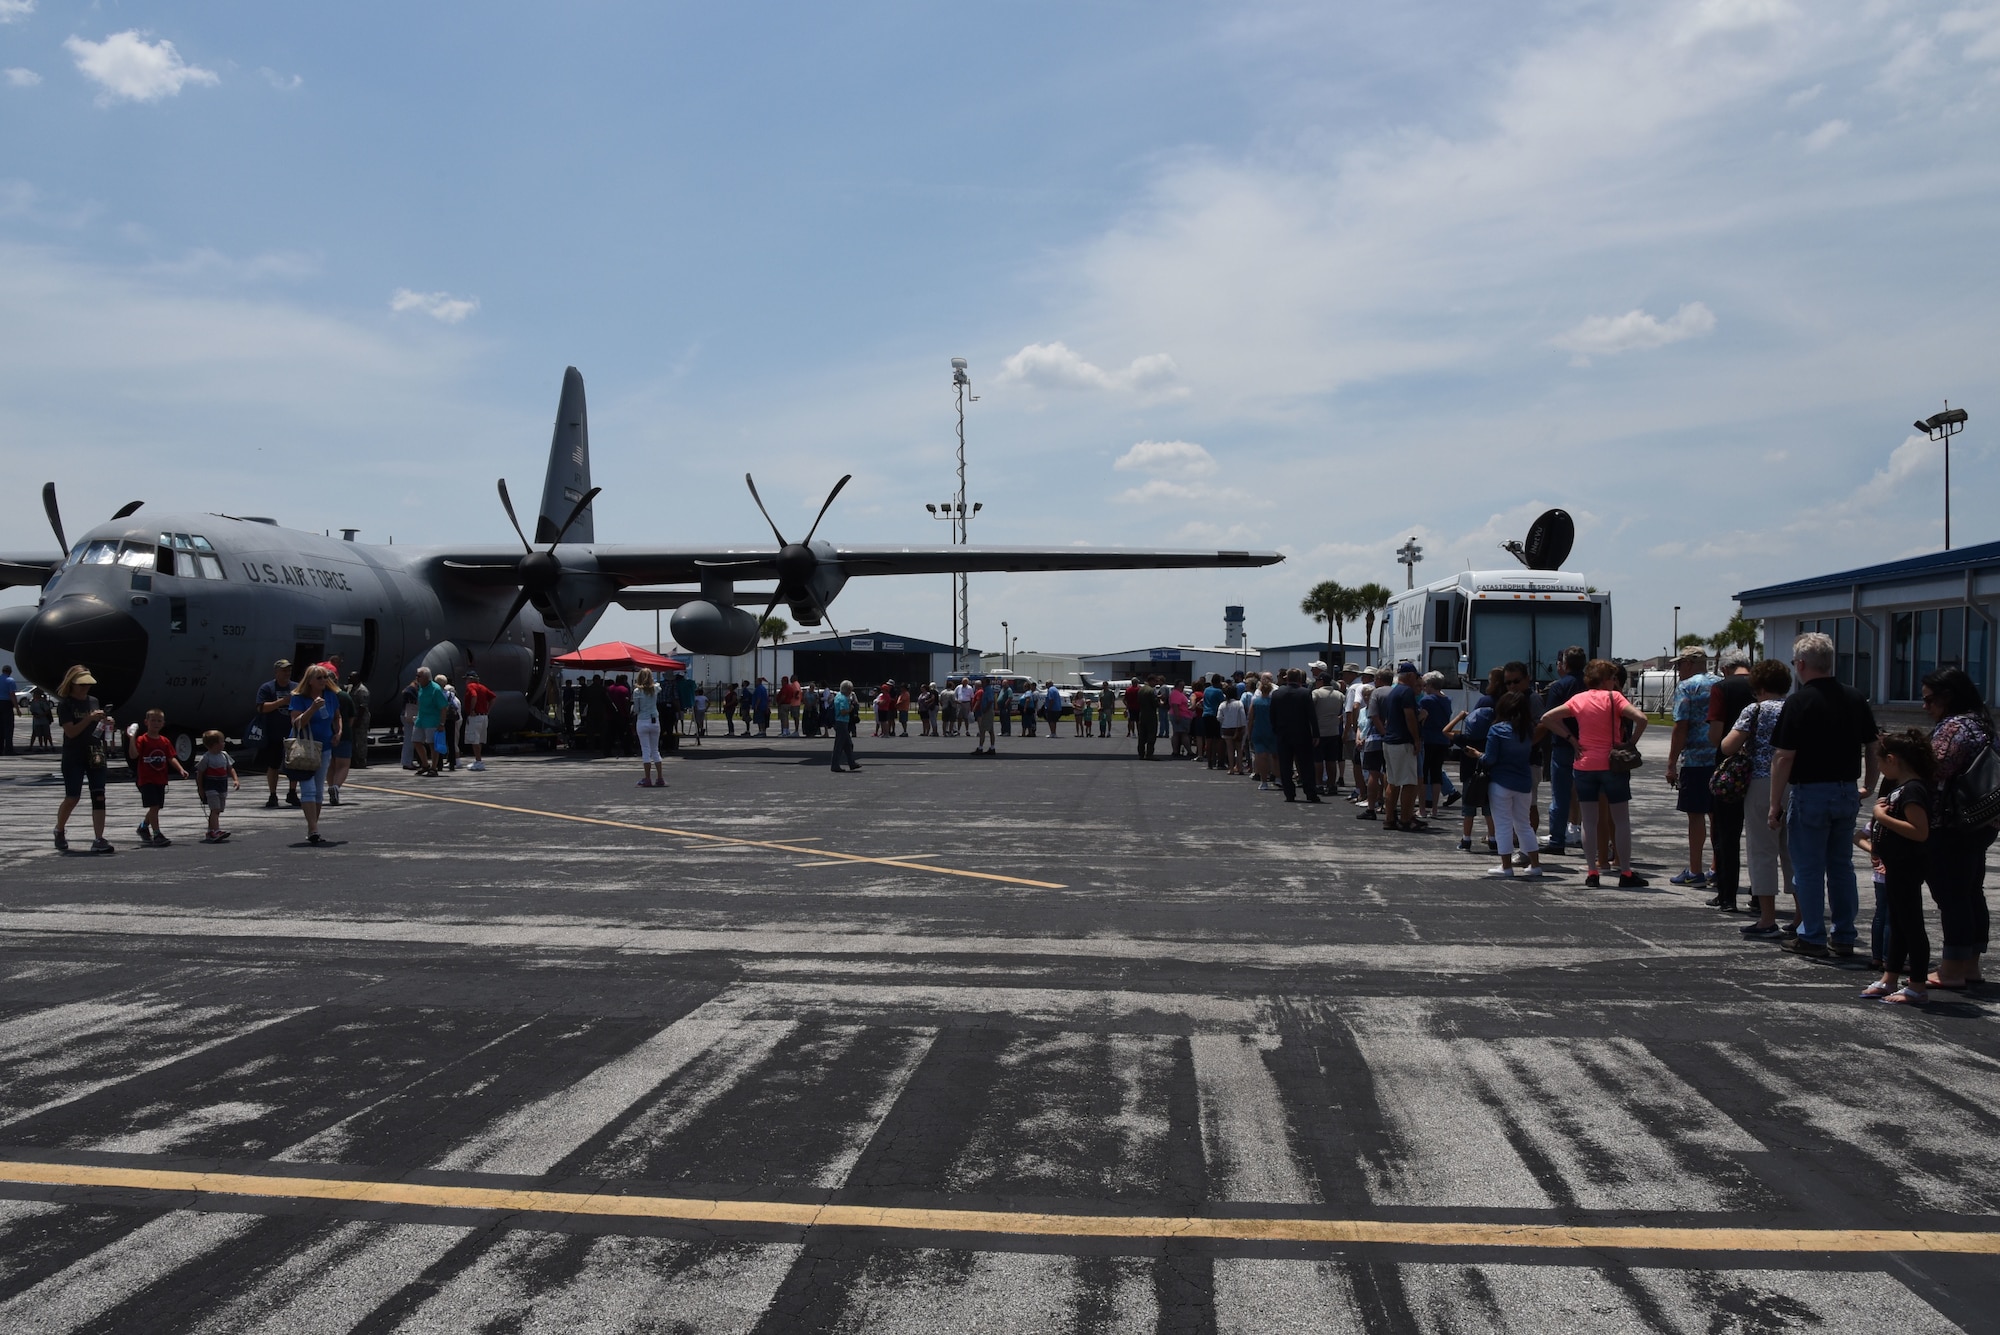 People line up at the Lakeland Linder Regional Airport, Lakeland, Florida May 11, 2018, to see the WC-130J aircraft used by the 53rd Weather Reconnaissance Squadron to collect weather data for the National Hurricane Center's forecasts. NOAA's National Weather Service and NHC has conducted the Hurricane Awareness Tour for more than 35 years; however, this is the fourth year the 53rd WRS has participated in all five stops of the awareness and preparedness event, which was in conjunction with National Hurricane Preparedness Week May 7-11, 2018. (U.S. Air Force photo/Maj. Marnee A.C. Losurdo)